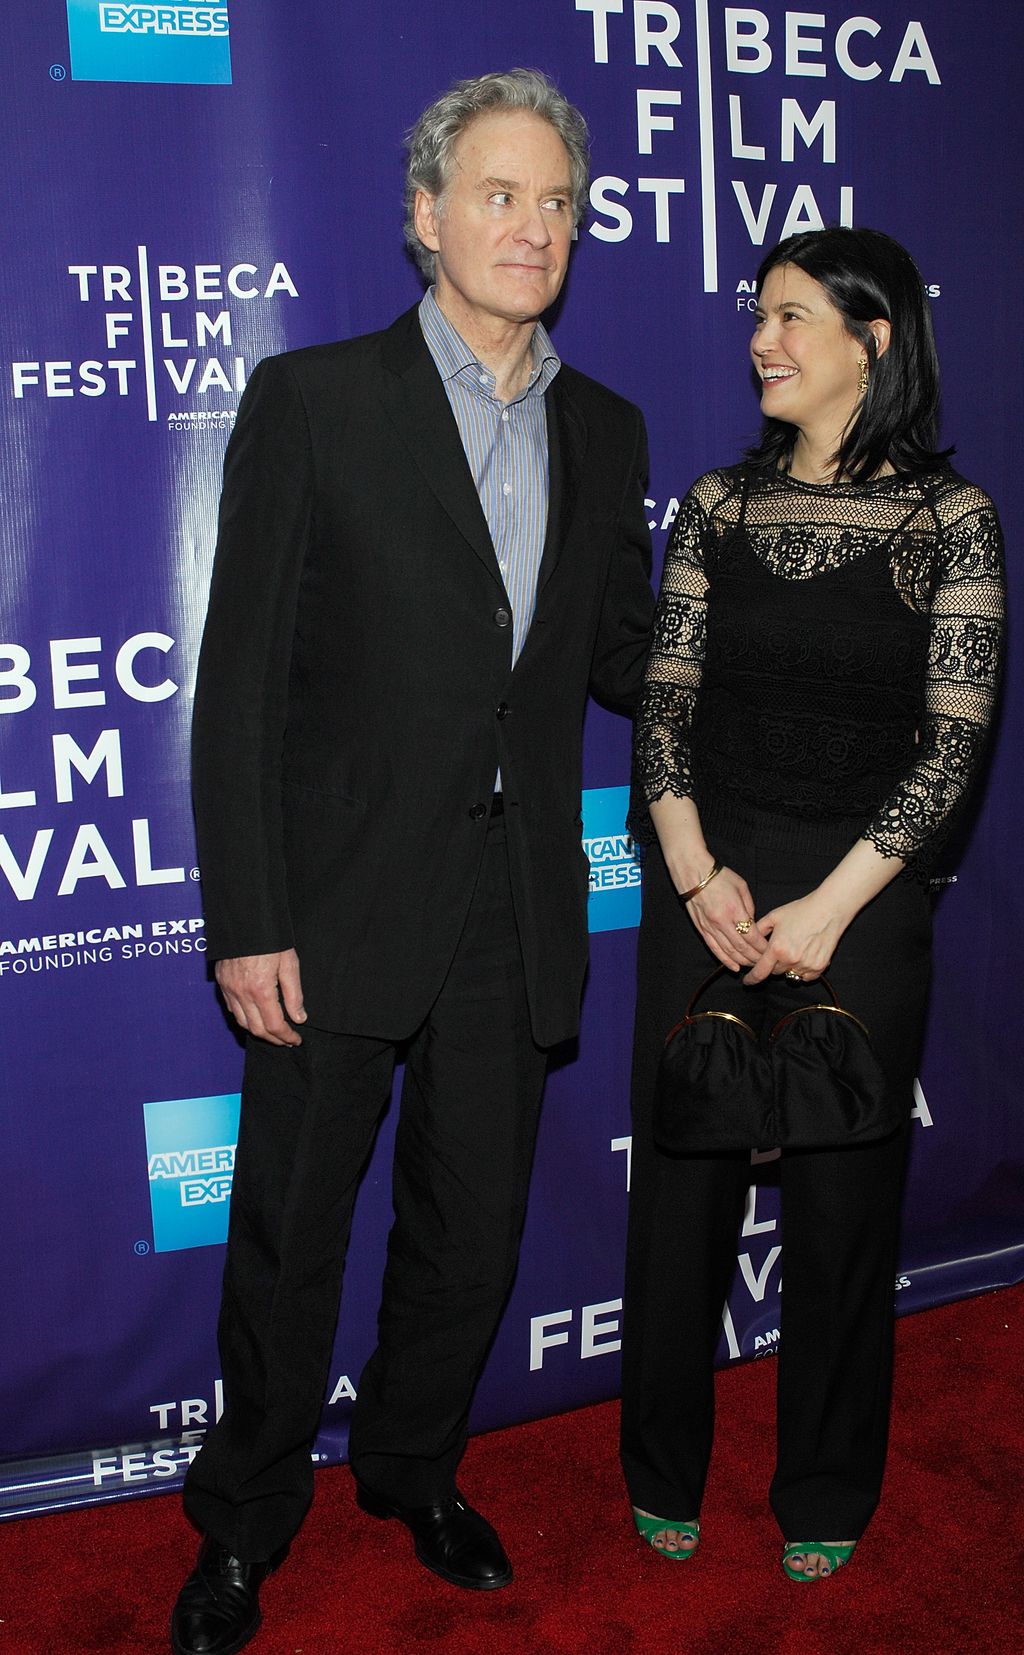 Premiere Of "Queen To Play" At The 2009 Tribeca Film Festival VERTICAL 